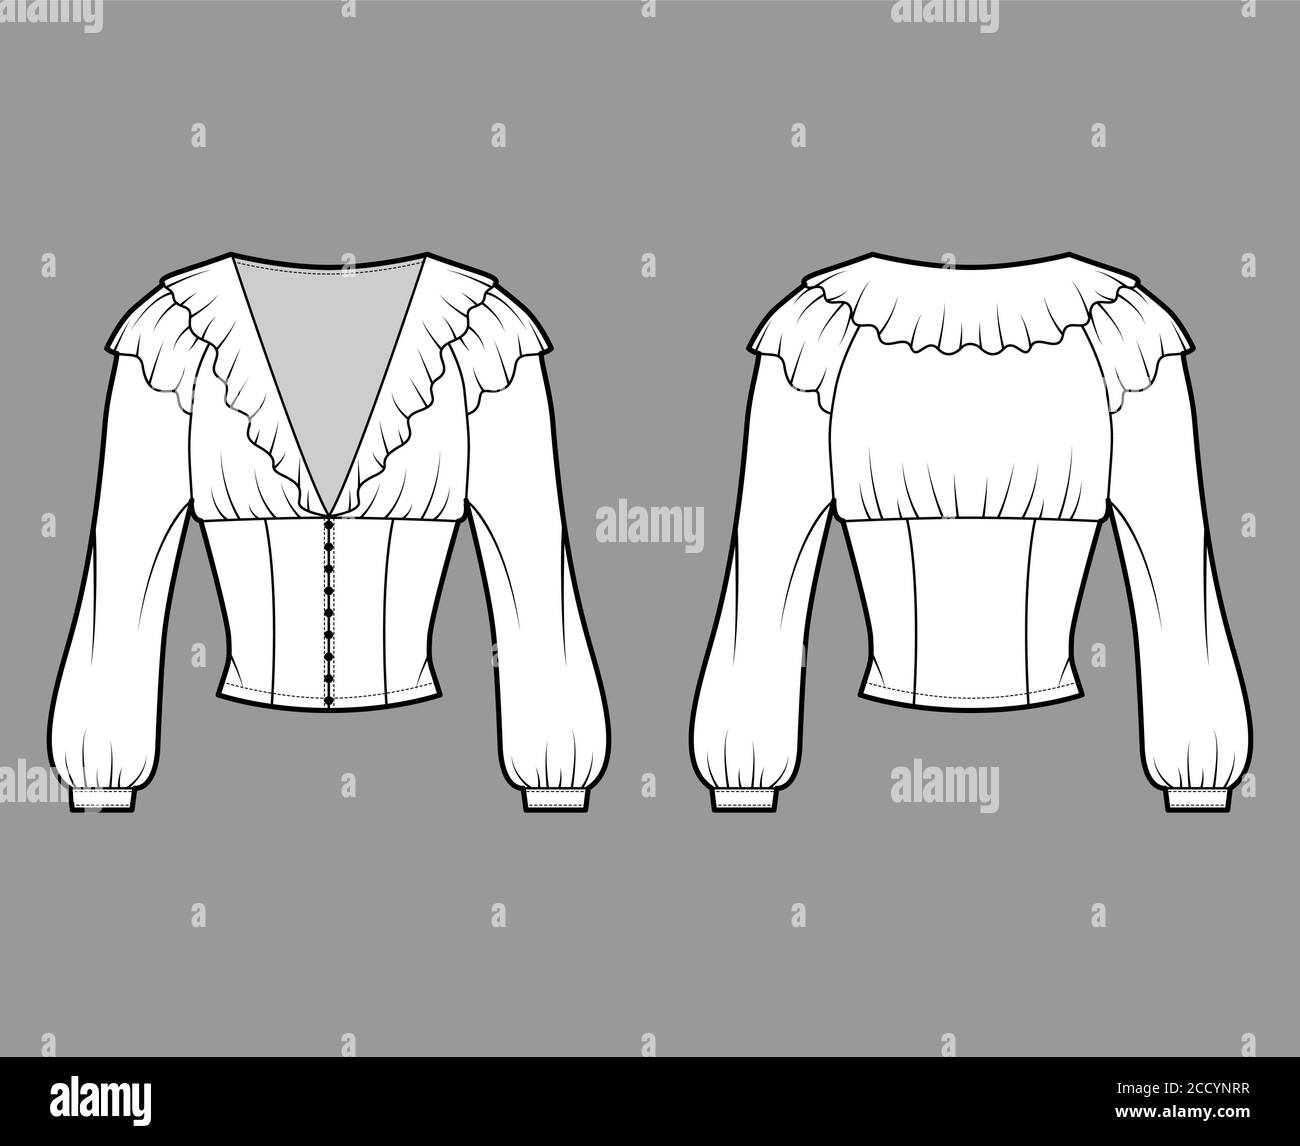 Ruffled cropped blouse technical fashion illustration with long bishop sleeves, puffed shoulders, front button fastenings. Flat apparel top template front, back white color. Women men unisex shirt CAD Stock Vector